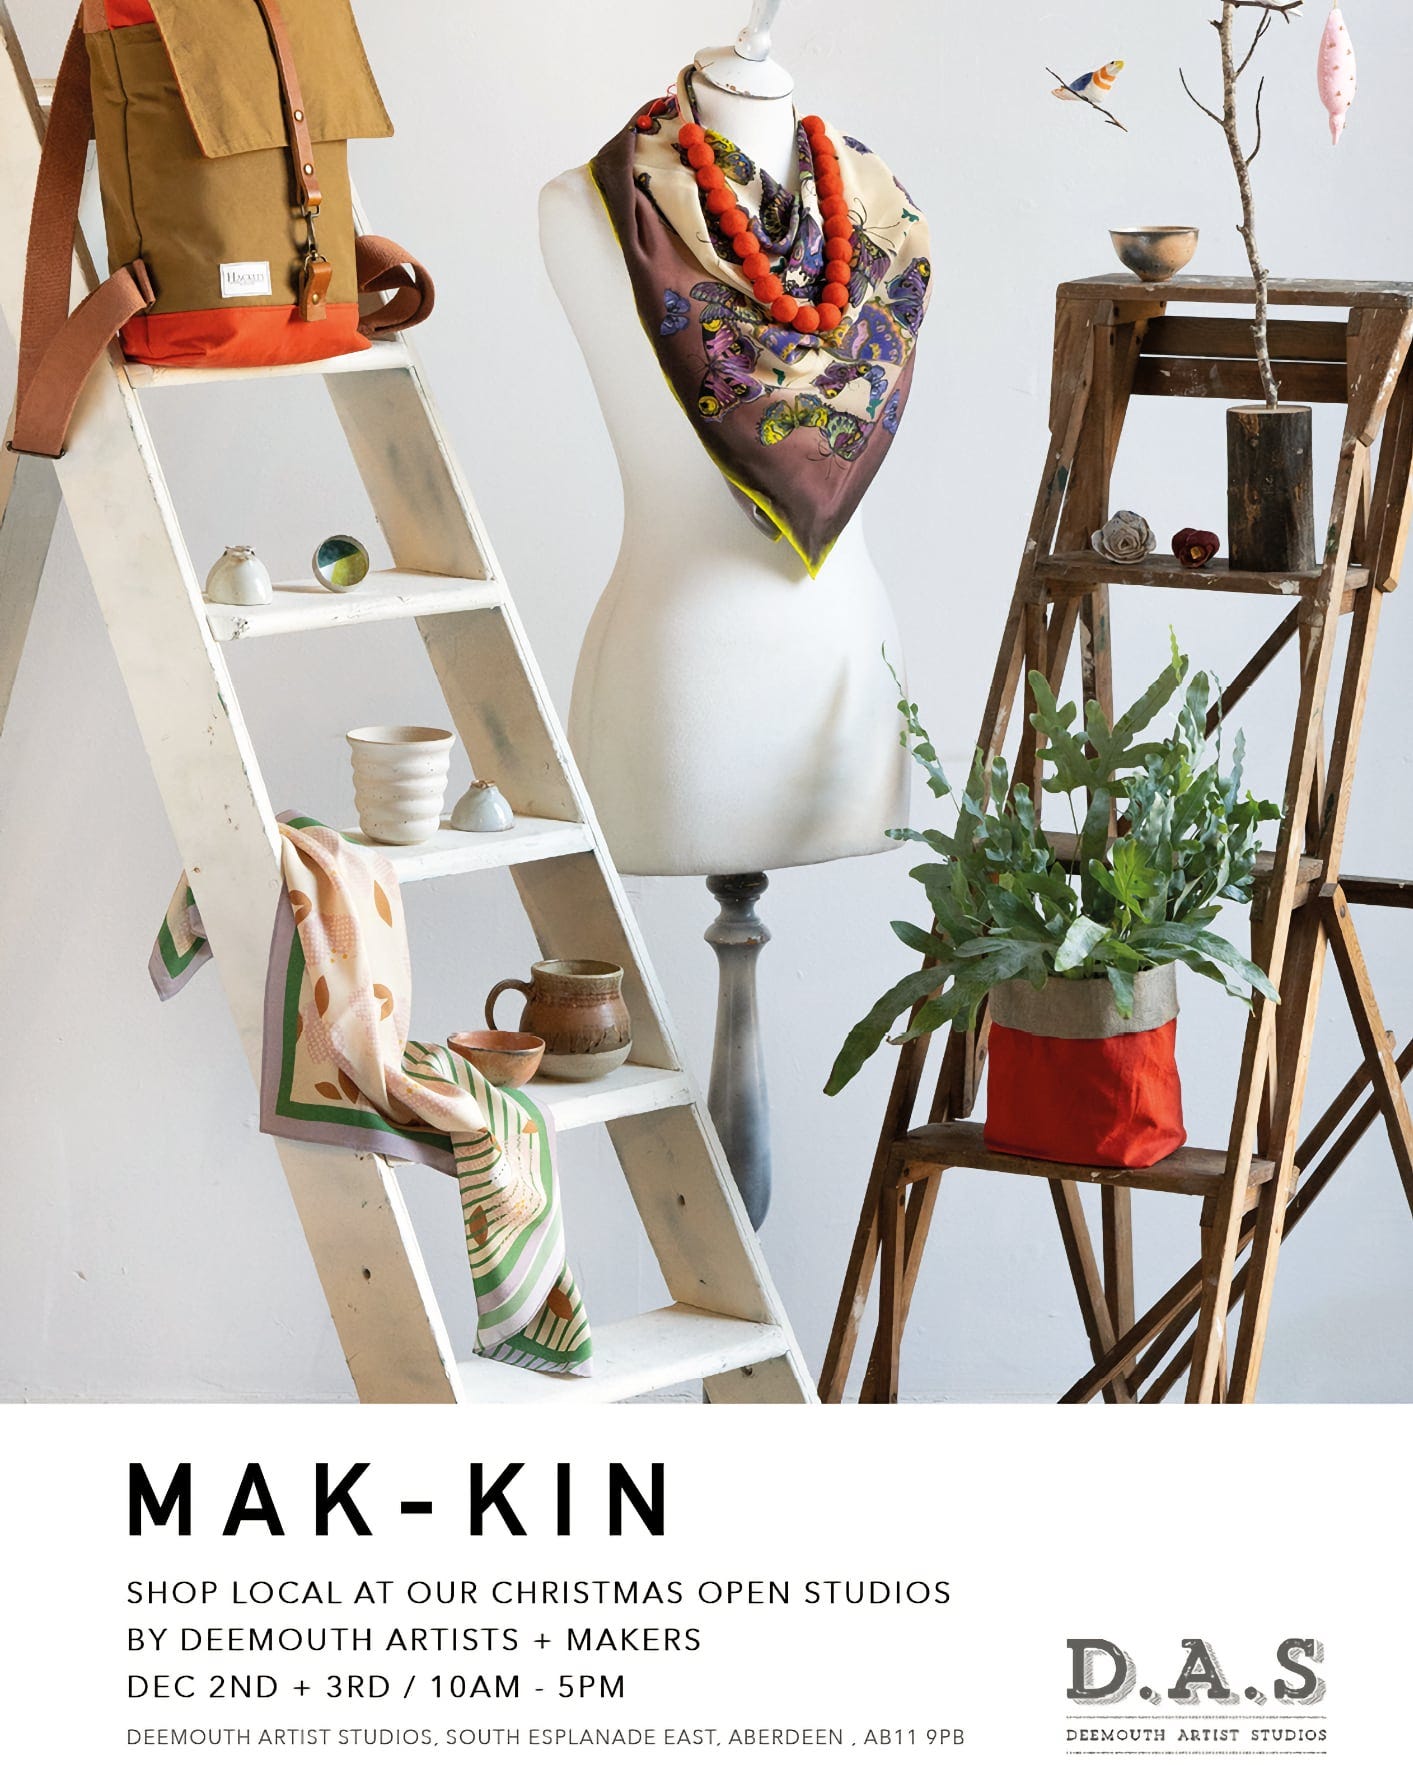 A promotional poster for "MAK-KIN," an event for shopping locally at Christmas open studios by Deemouth Artists + Makers. It showcases a creatively arranged display with an artist's mannequin dressed in a jacket and a colourful scarf, accessorised with chunky necklaces. Beside it, on a wooden stool, there's a potted plant in a two-tone fabric pot, and a small wooden ladder holds a cushion and a few ceramic pieces. A bird and a fish ornament hang in the background, adding a whimsical touch. The event details at the bottom invite visitors to Deemouth Artist Studios on December 2nd and 3rd from 10 am to 5 pm. The address provided is South Esplanade East, Aberdeen, AB11 9PB.